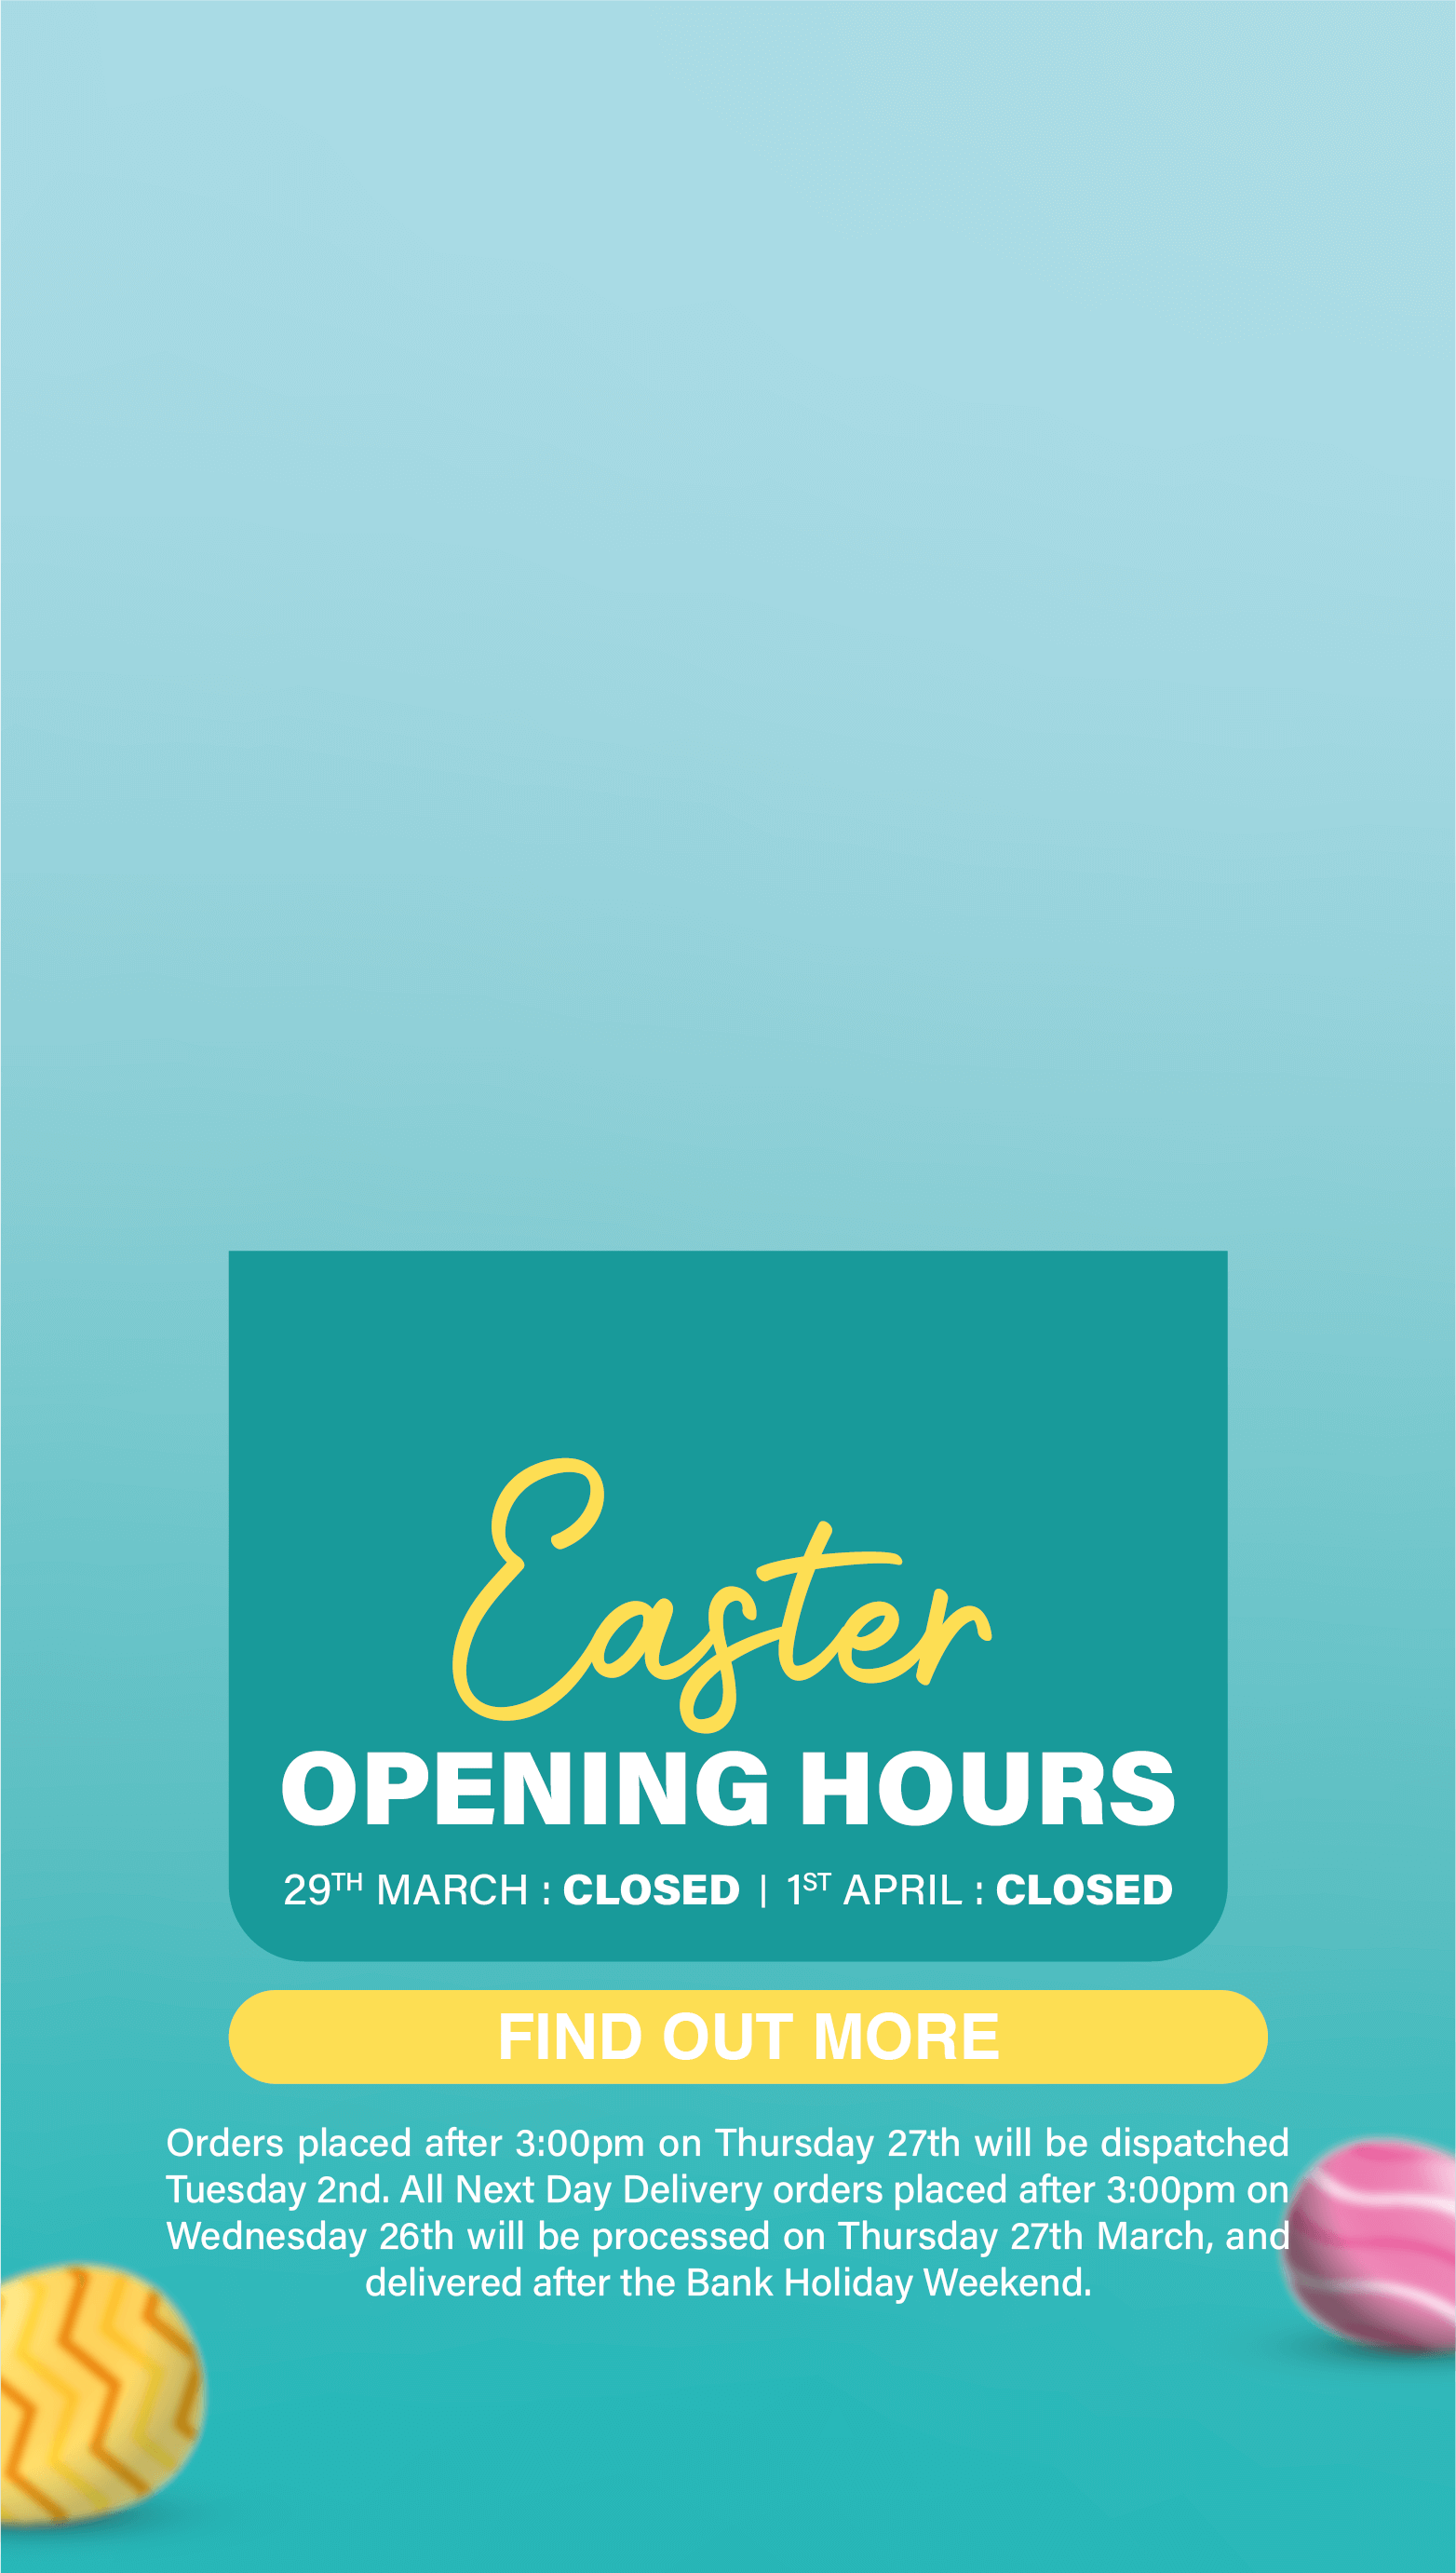 Easter Opening Hours vary this week, order now to ensure delivery before easter.